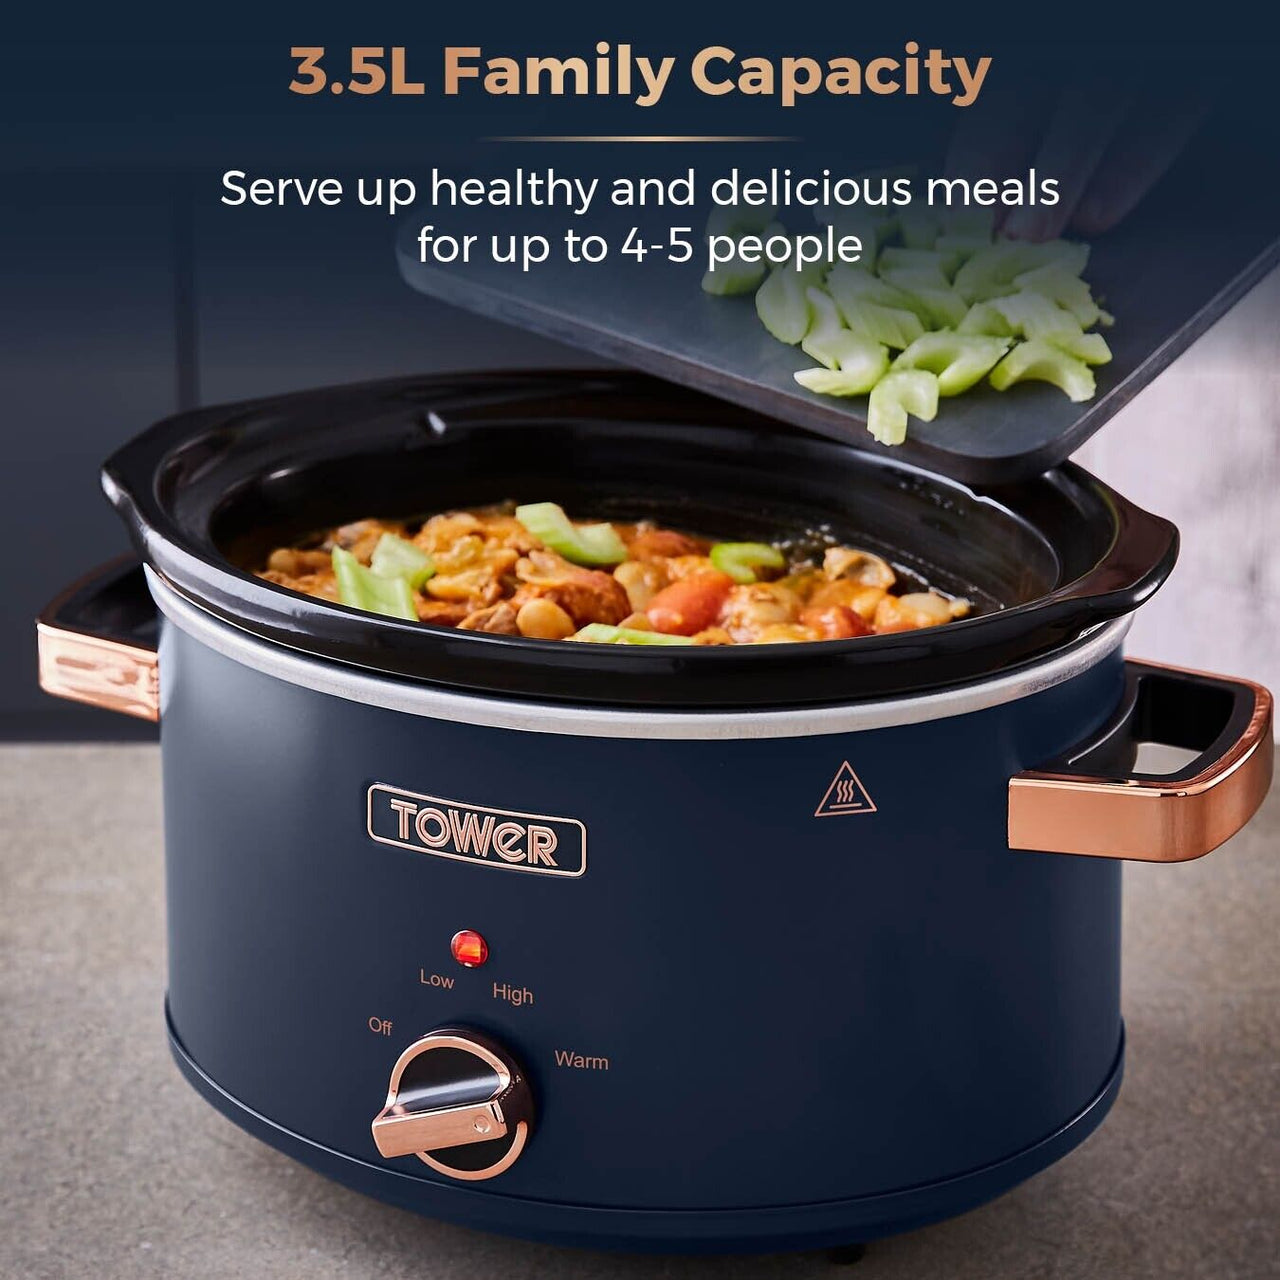 Tower Cavaletto 3.5L Slow Cooker Blue/Rose Gold Energy Efficient Family Capacity